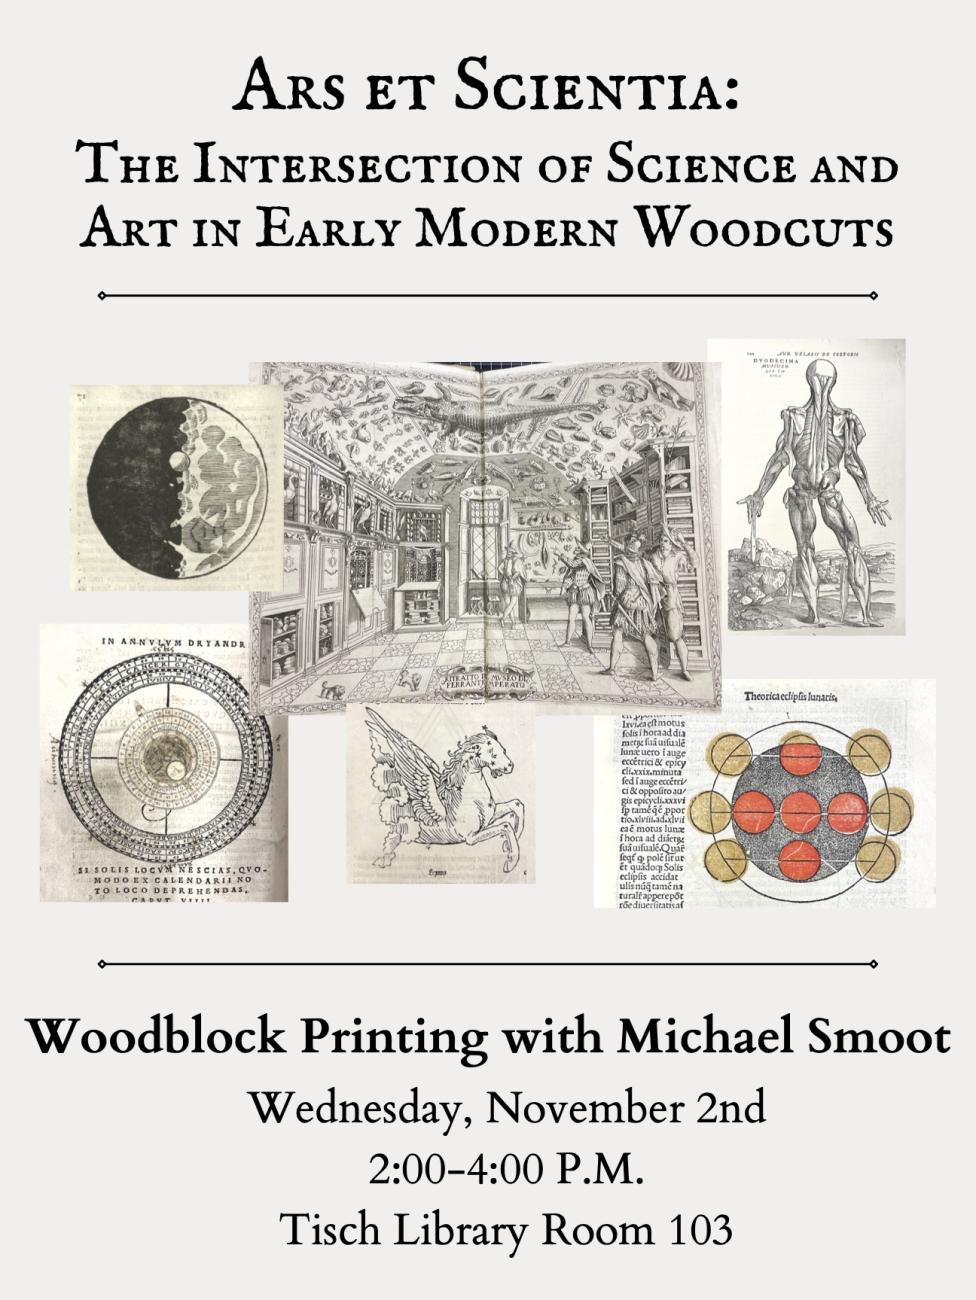 Ars et Scientia: The Intersection of Science and Art in Early Modern Woodcuts. Join us for Woodblock Printing with SMFA Professor Michael Smoot on Wednesday, November 2nd from 2:00-4:00 p.m. in Tisch Library Room 103.